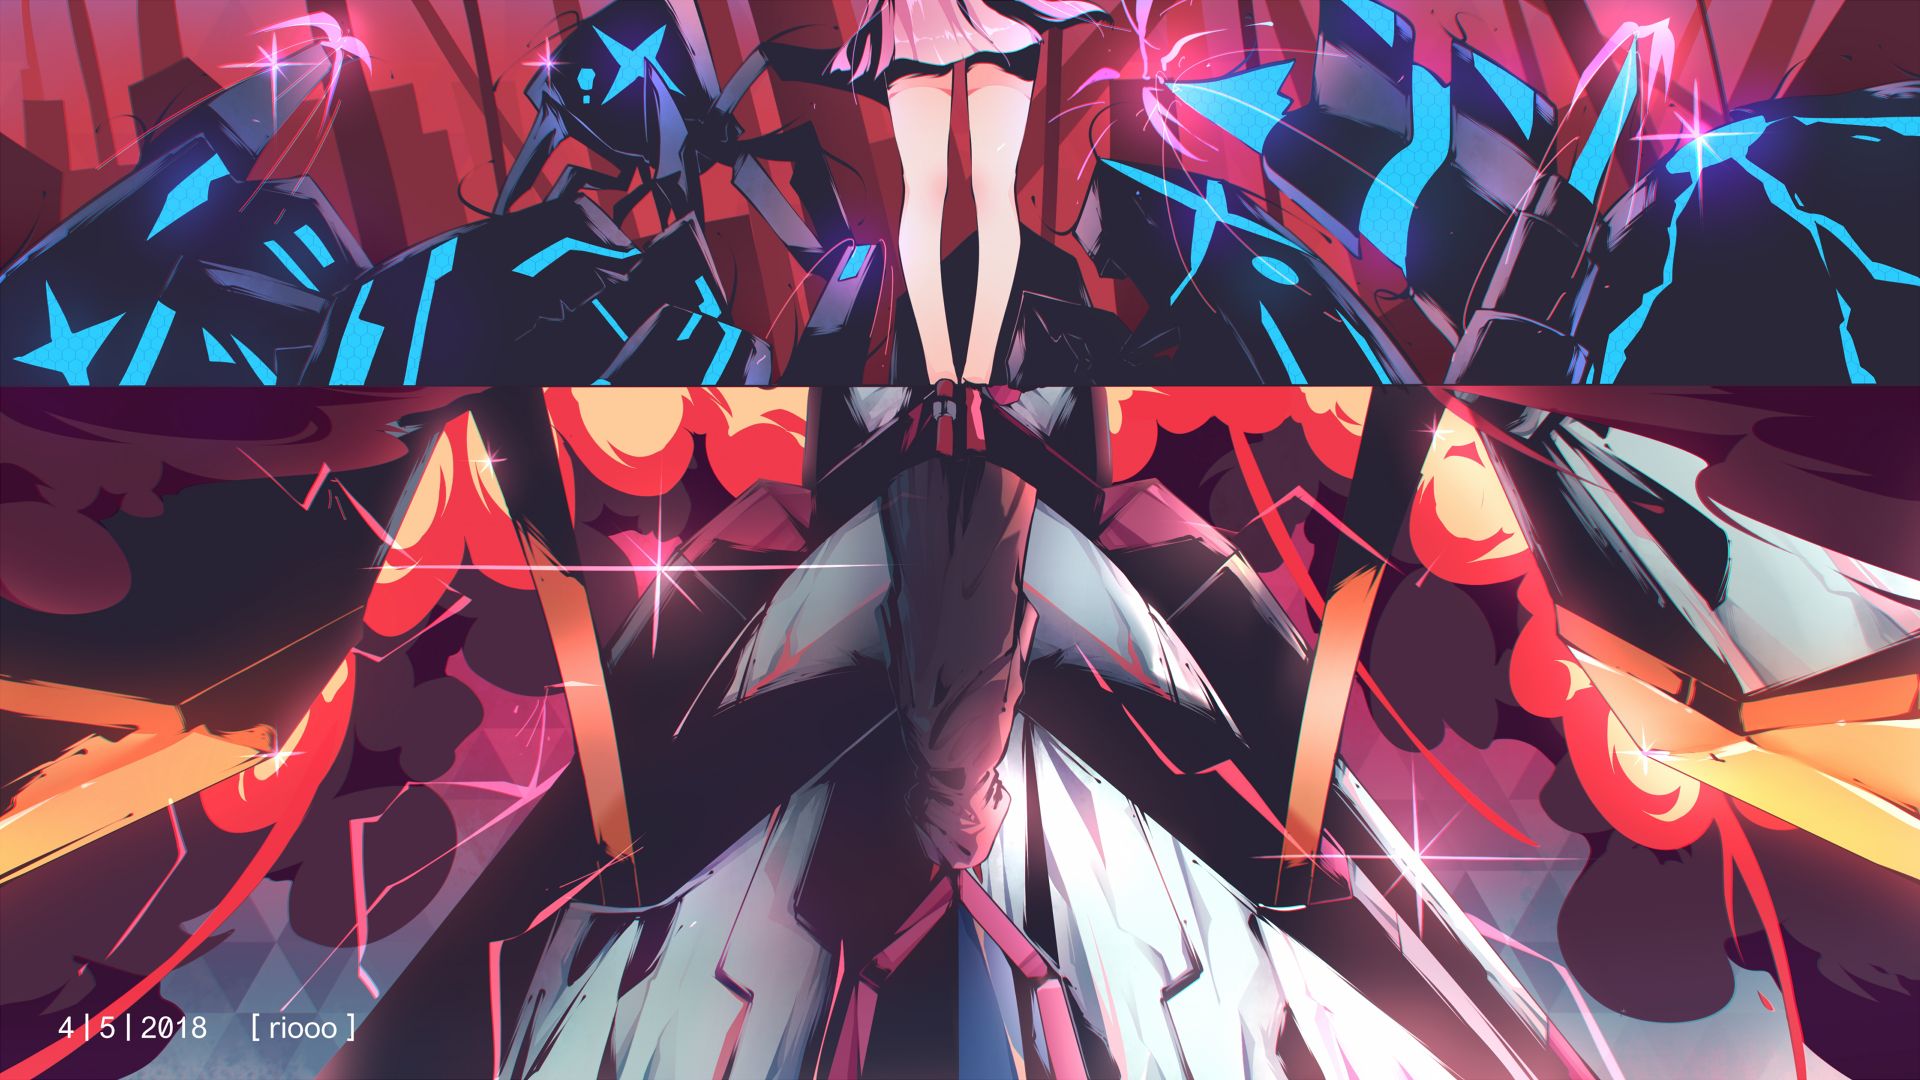 Free download wallpaper Anime, Darling In The Franxx, Zero Two (Darling In The Franxx), Strelizia (Darling In The Franxx) on your PC desktop